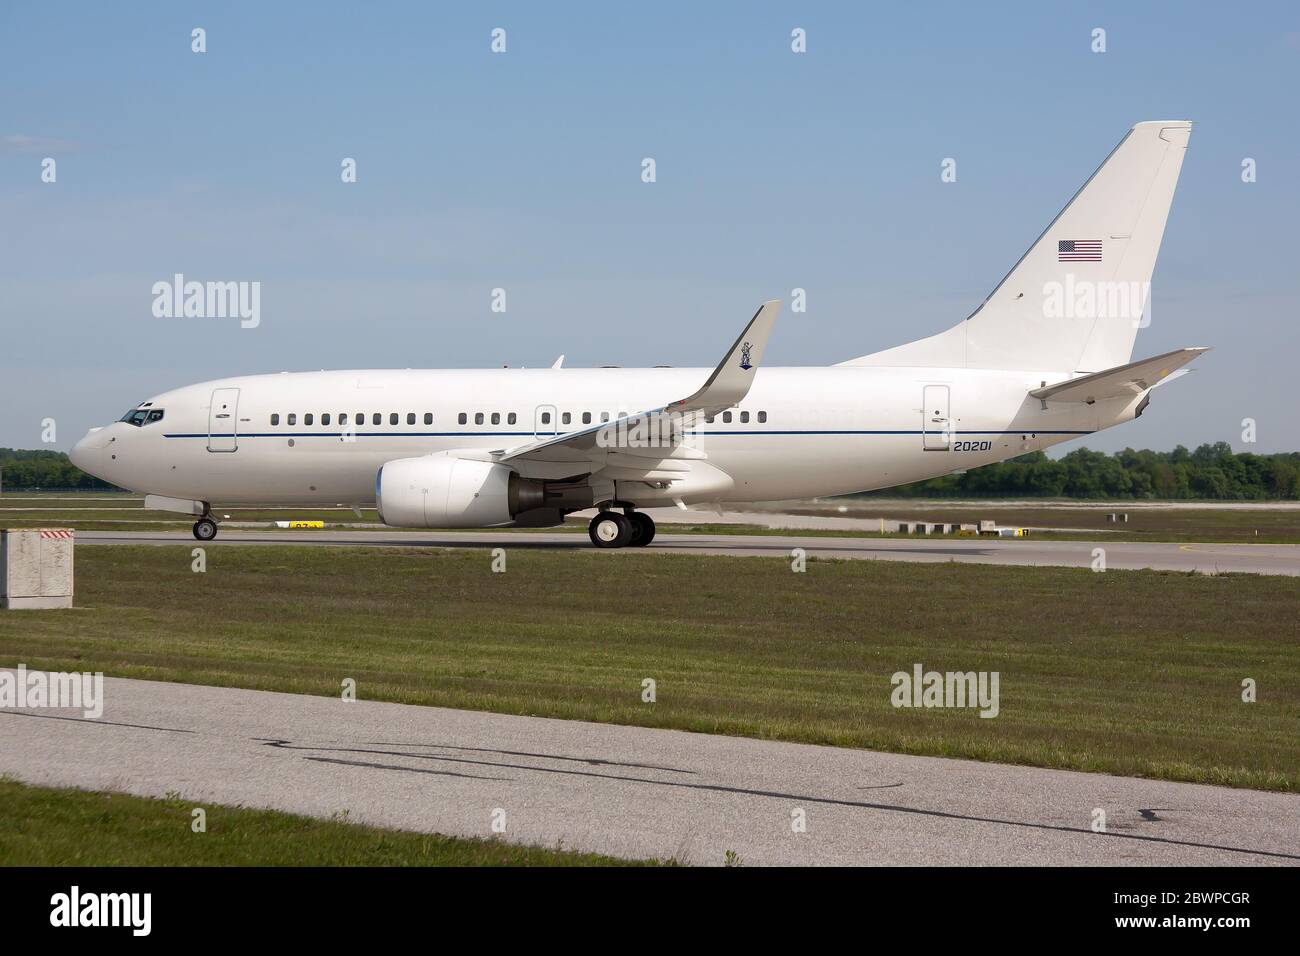 A United States US Air Force (USAF) Boeing C-40C on the taxiway at Munich airport. Stock Photo